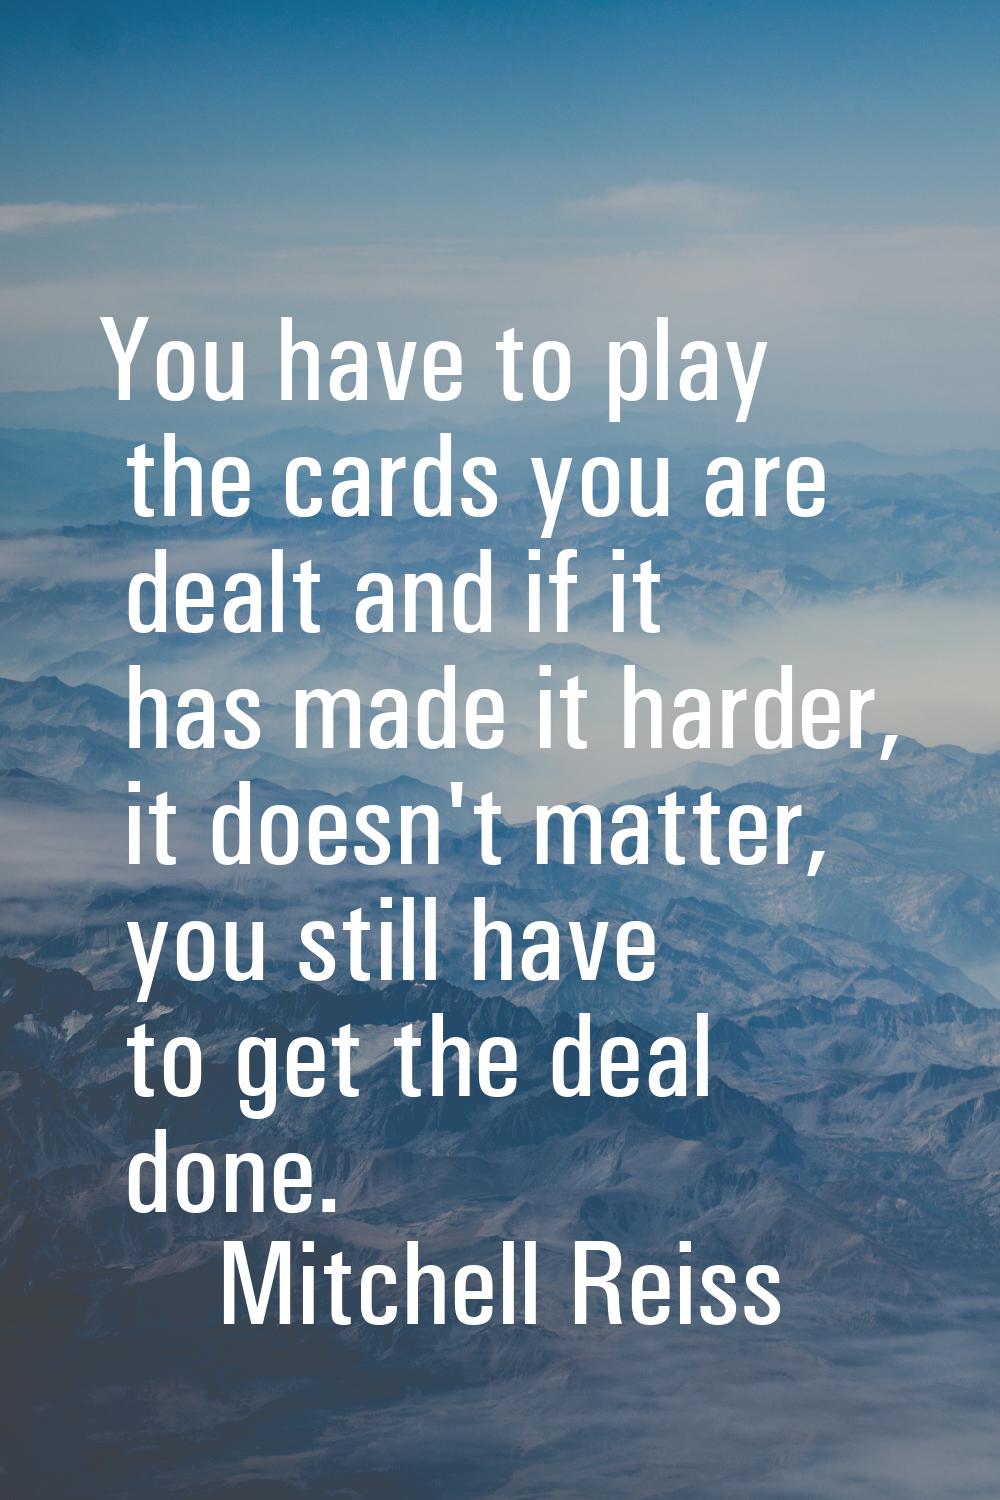 You have to play the cards you are dealt and if it has made it harder, it doesn't matter, you still